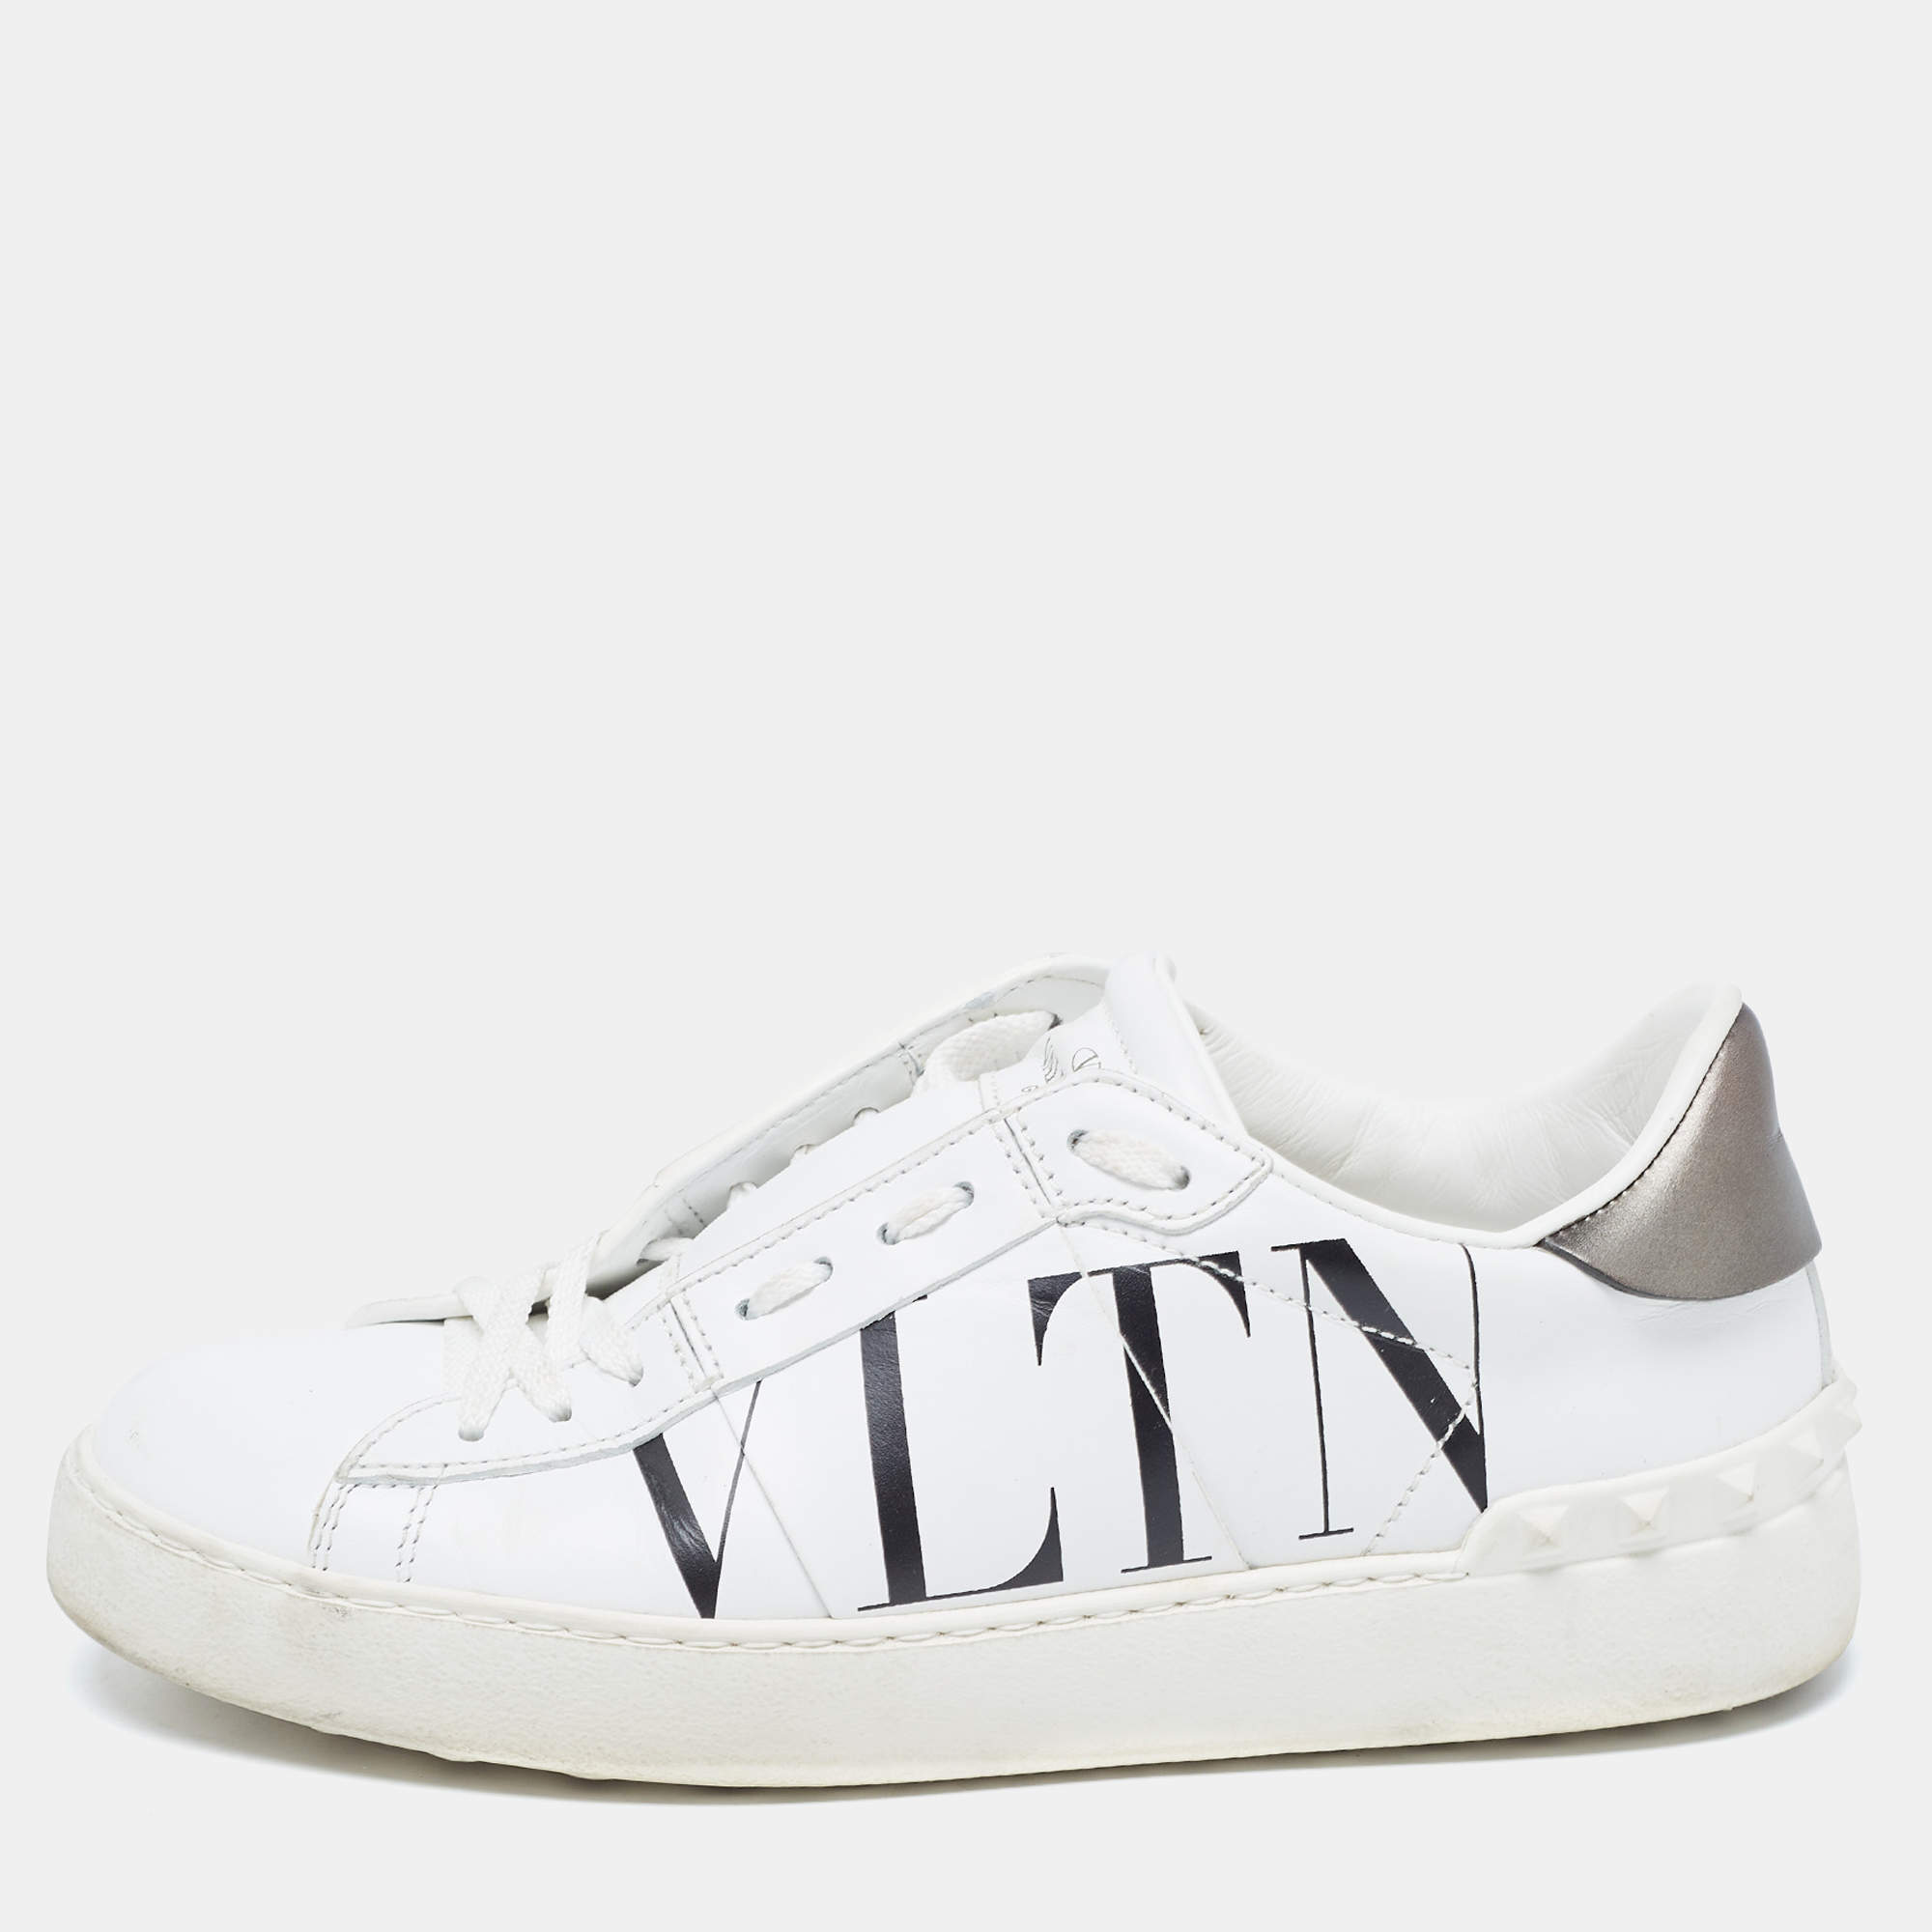 Valentino White Leather VLTN Open Sneakers Size 37